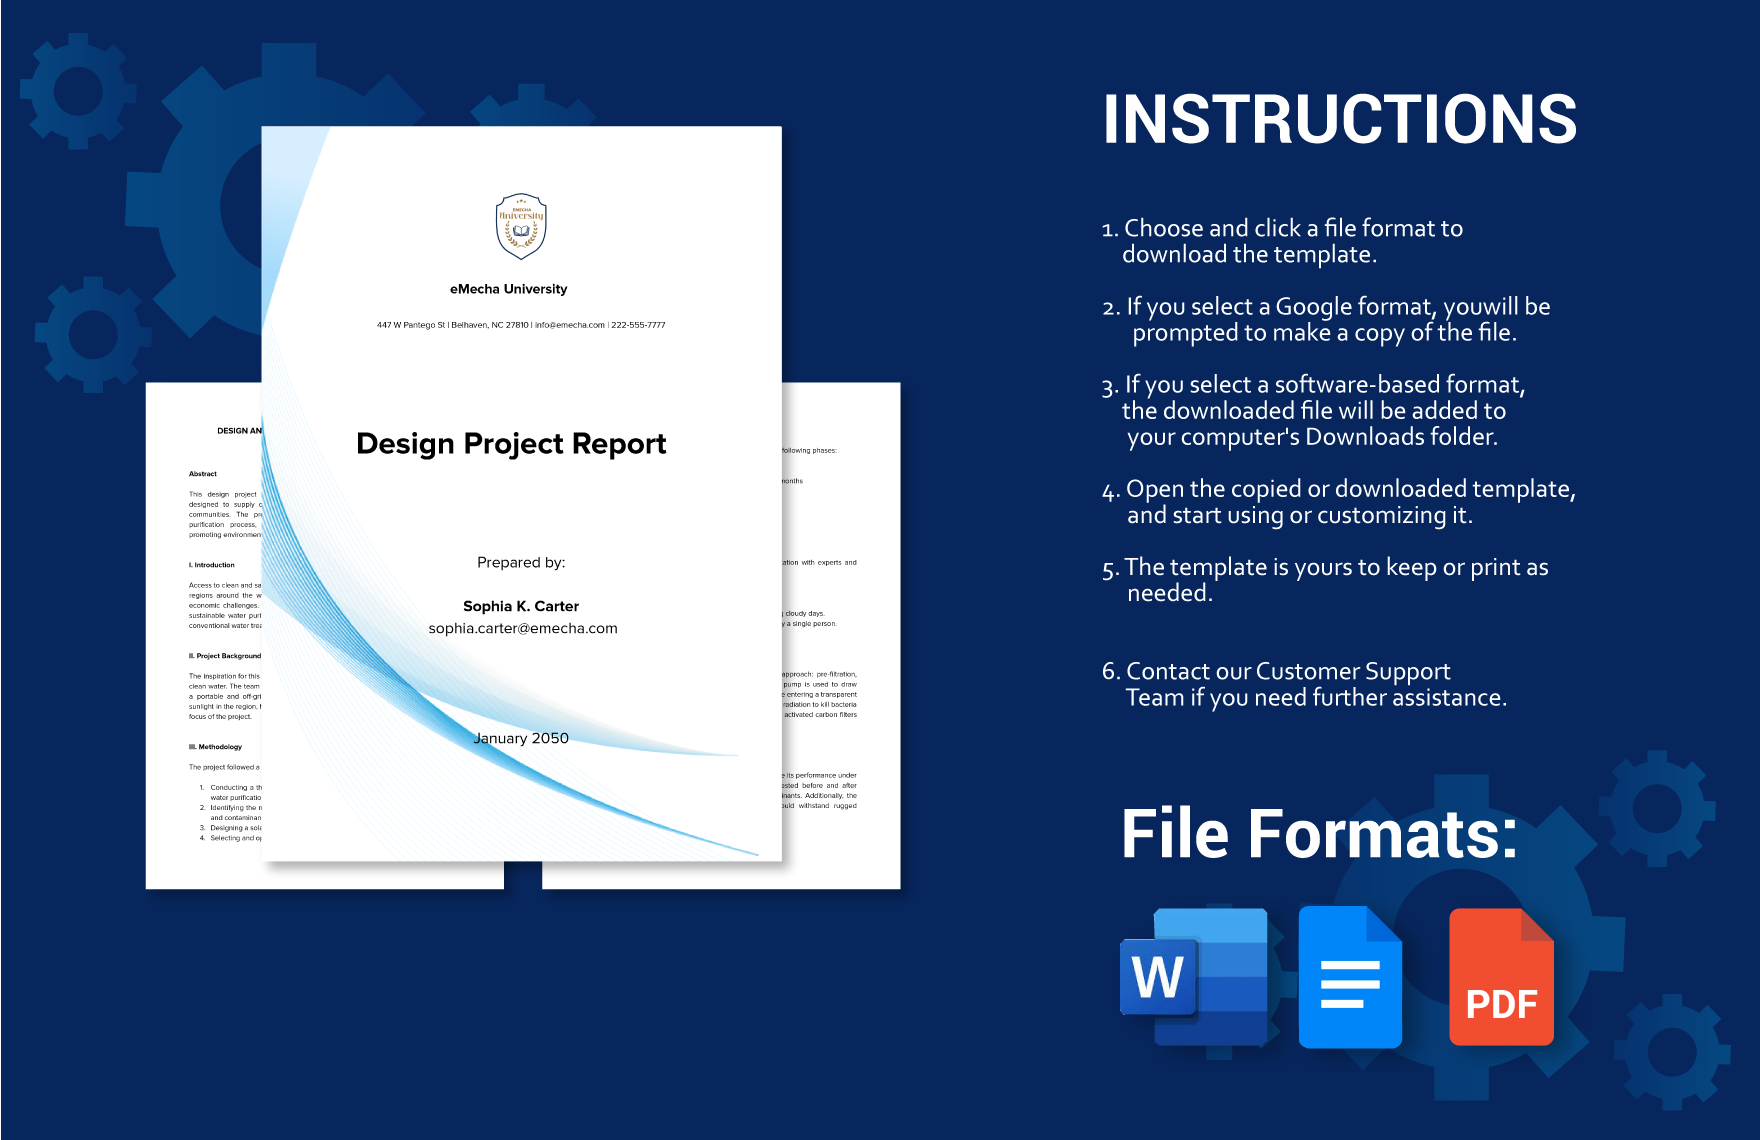 Mechanical Engineering Student Design Projects Template